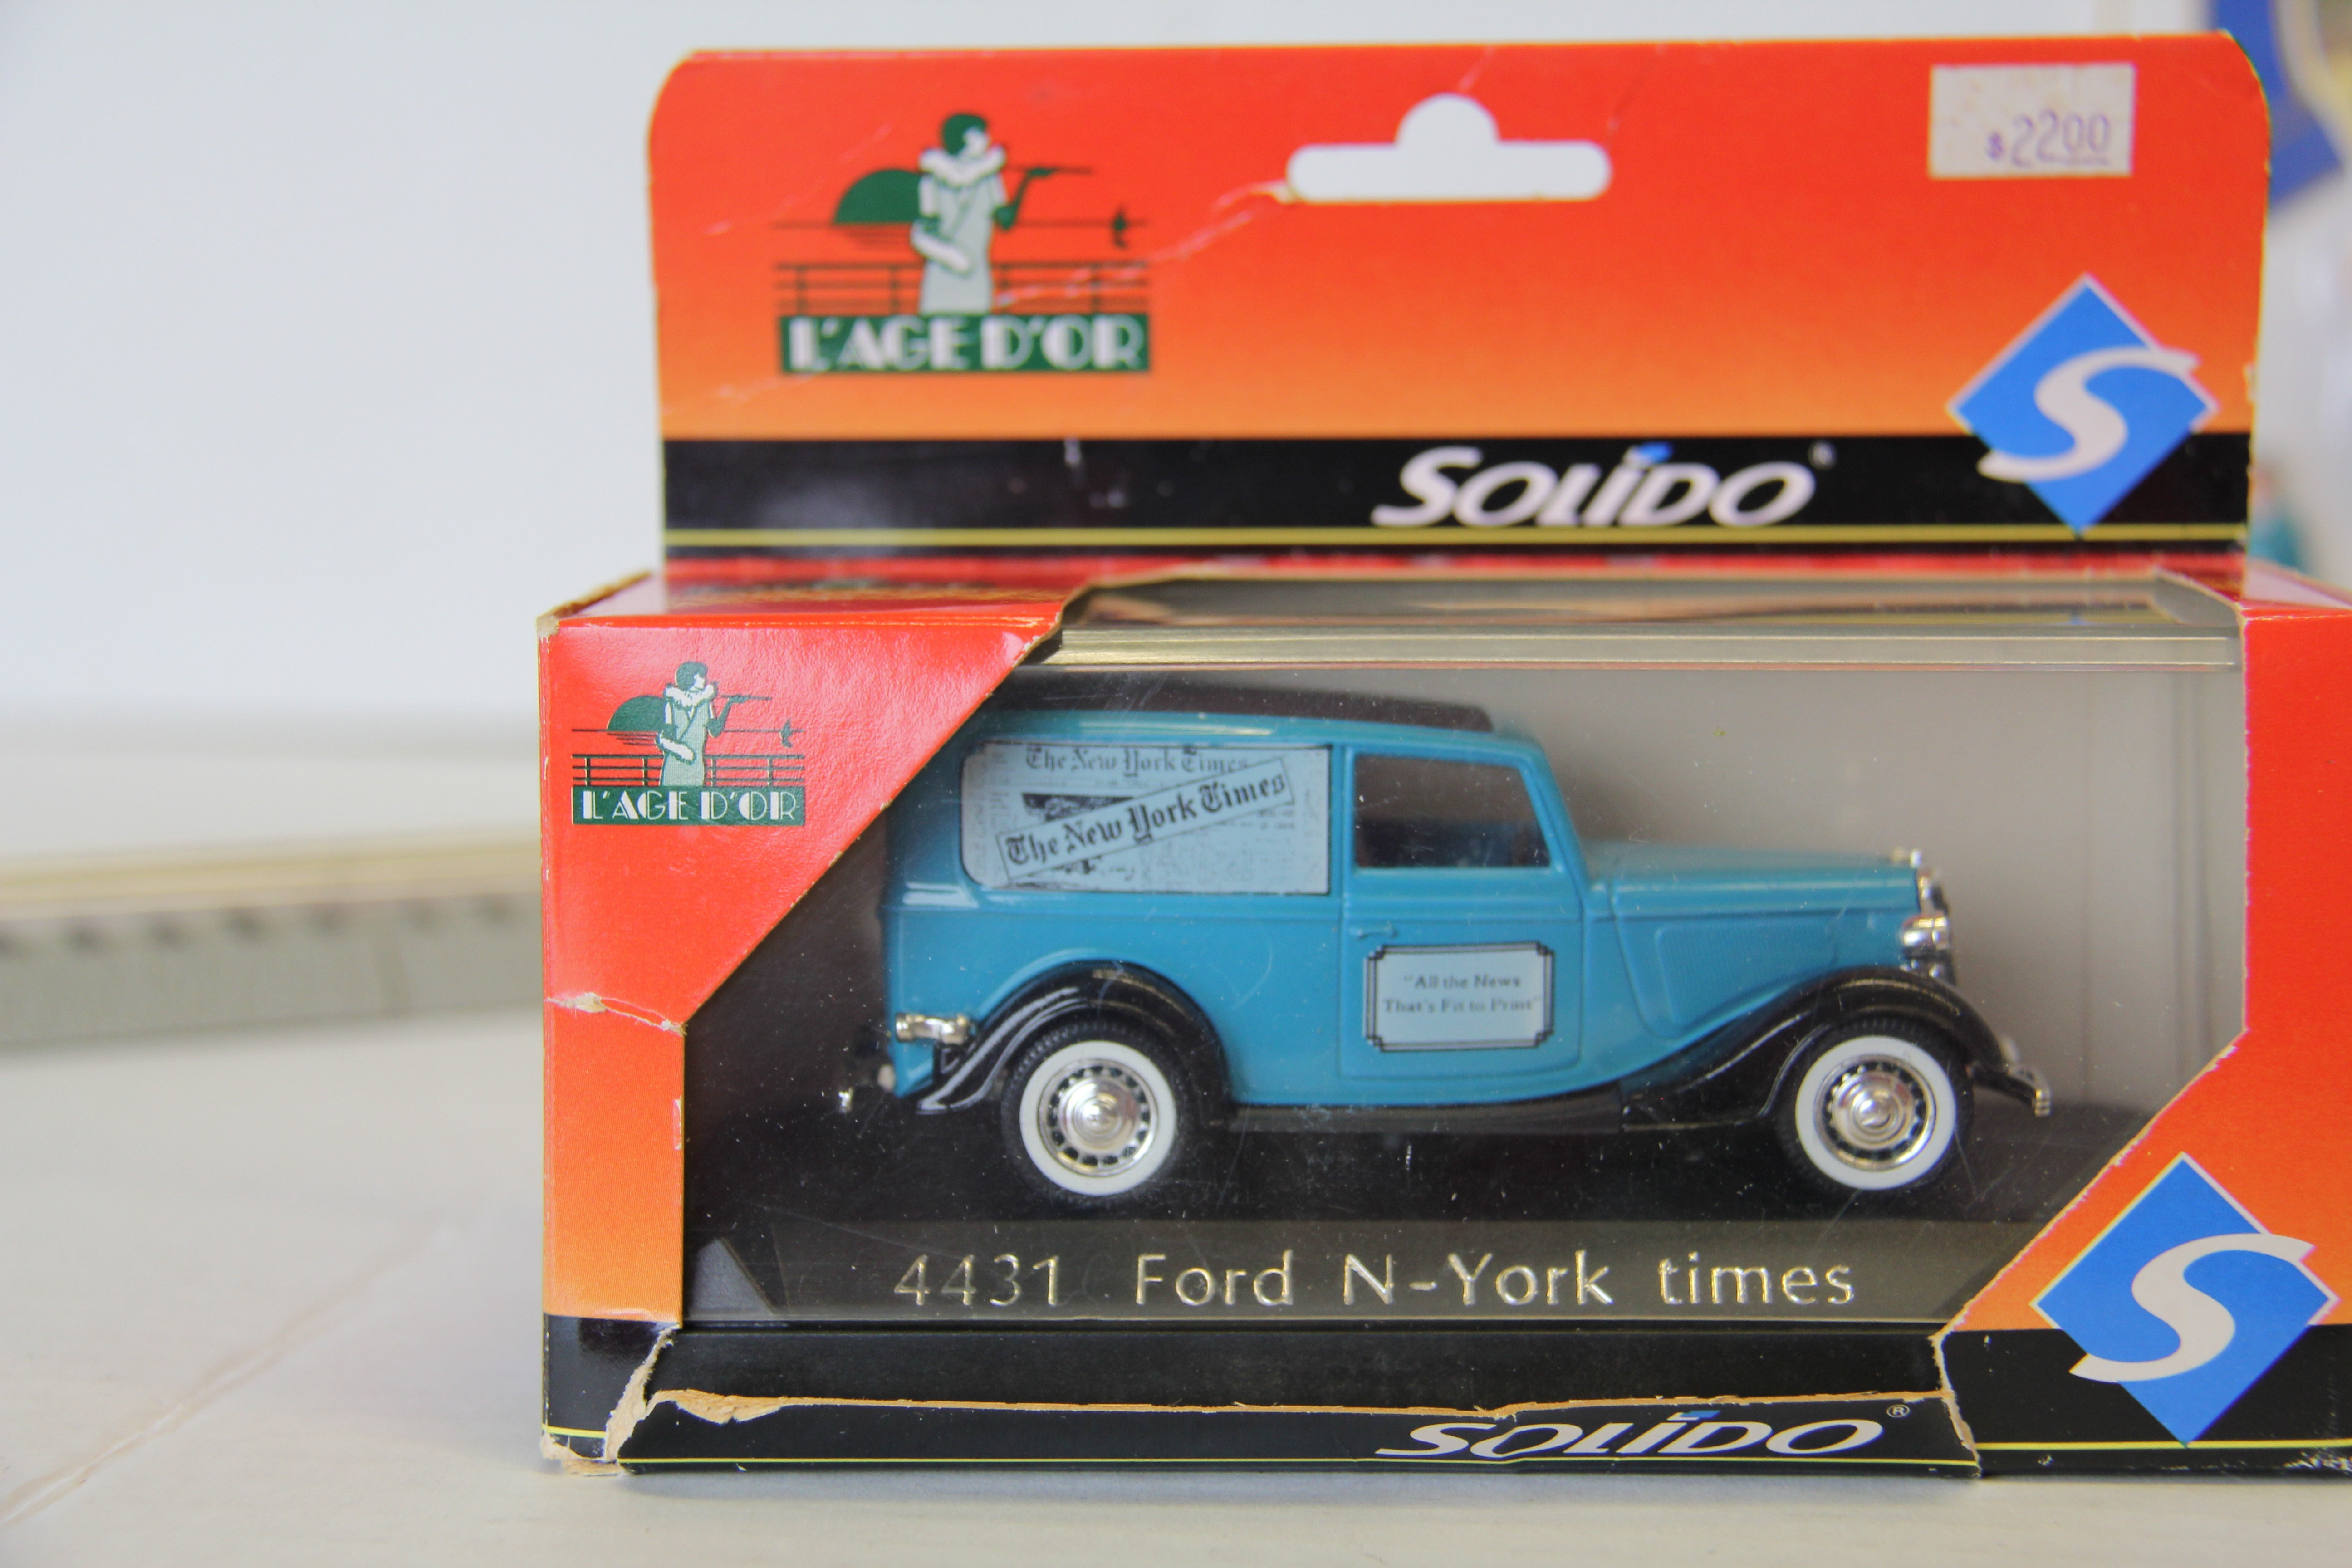 L'Age D'or 4431 Ford N-York times 1:43 Scale-Second hand-M4244